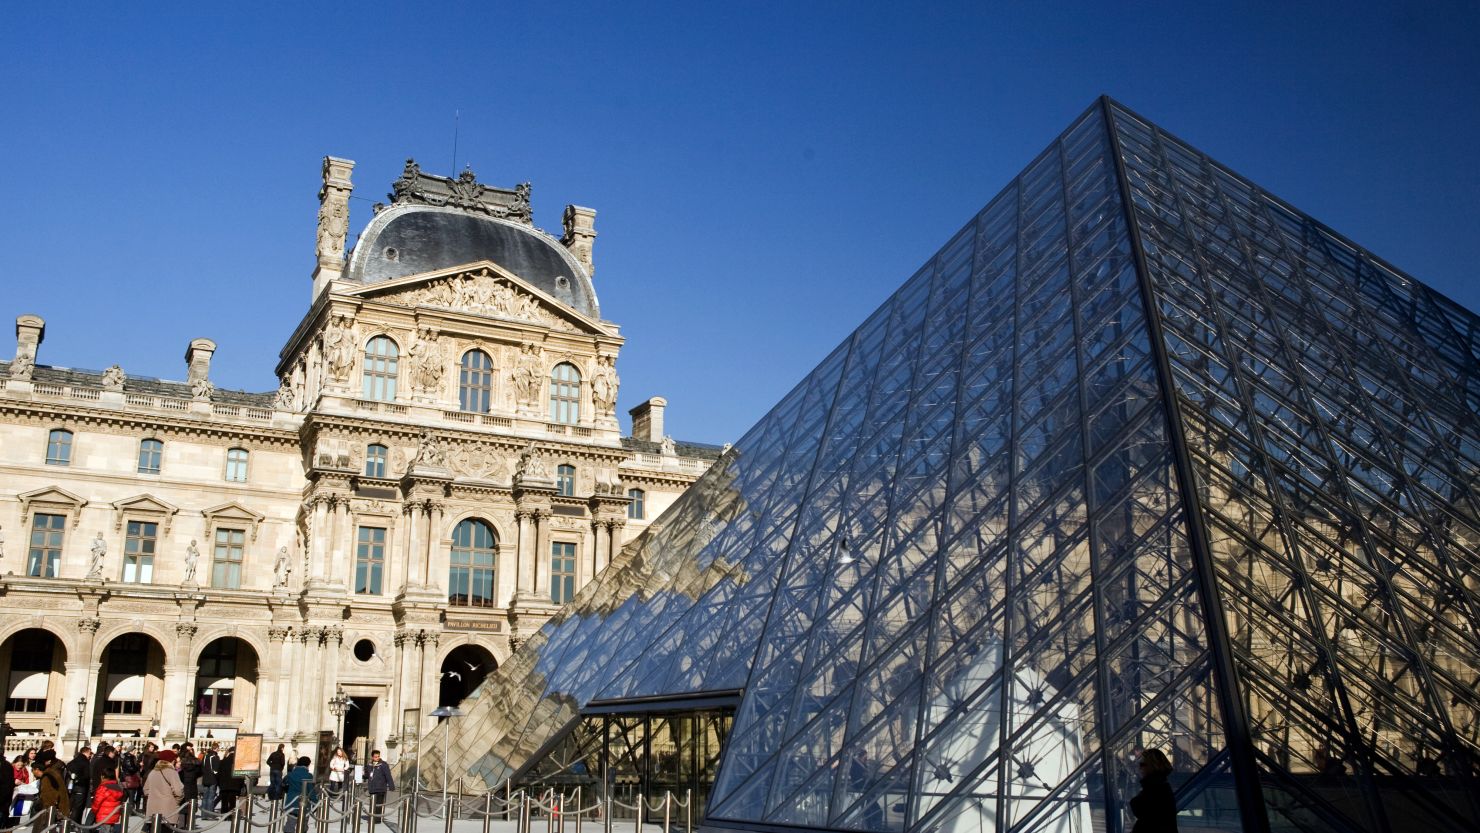 Gangs of pickpockets have been targeting staff and visitors at the Louvre, museum staff say.